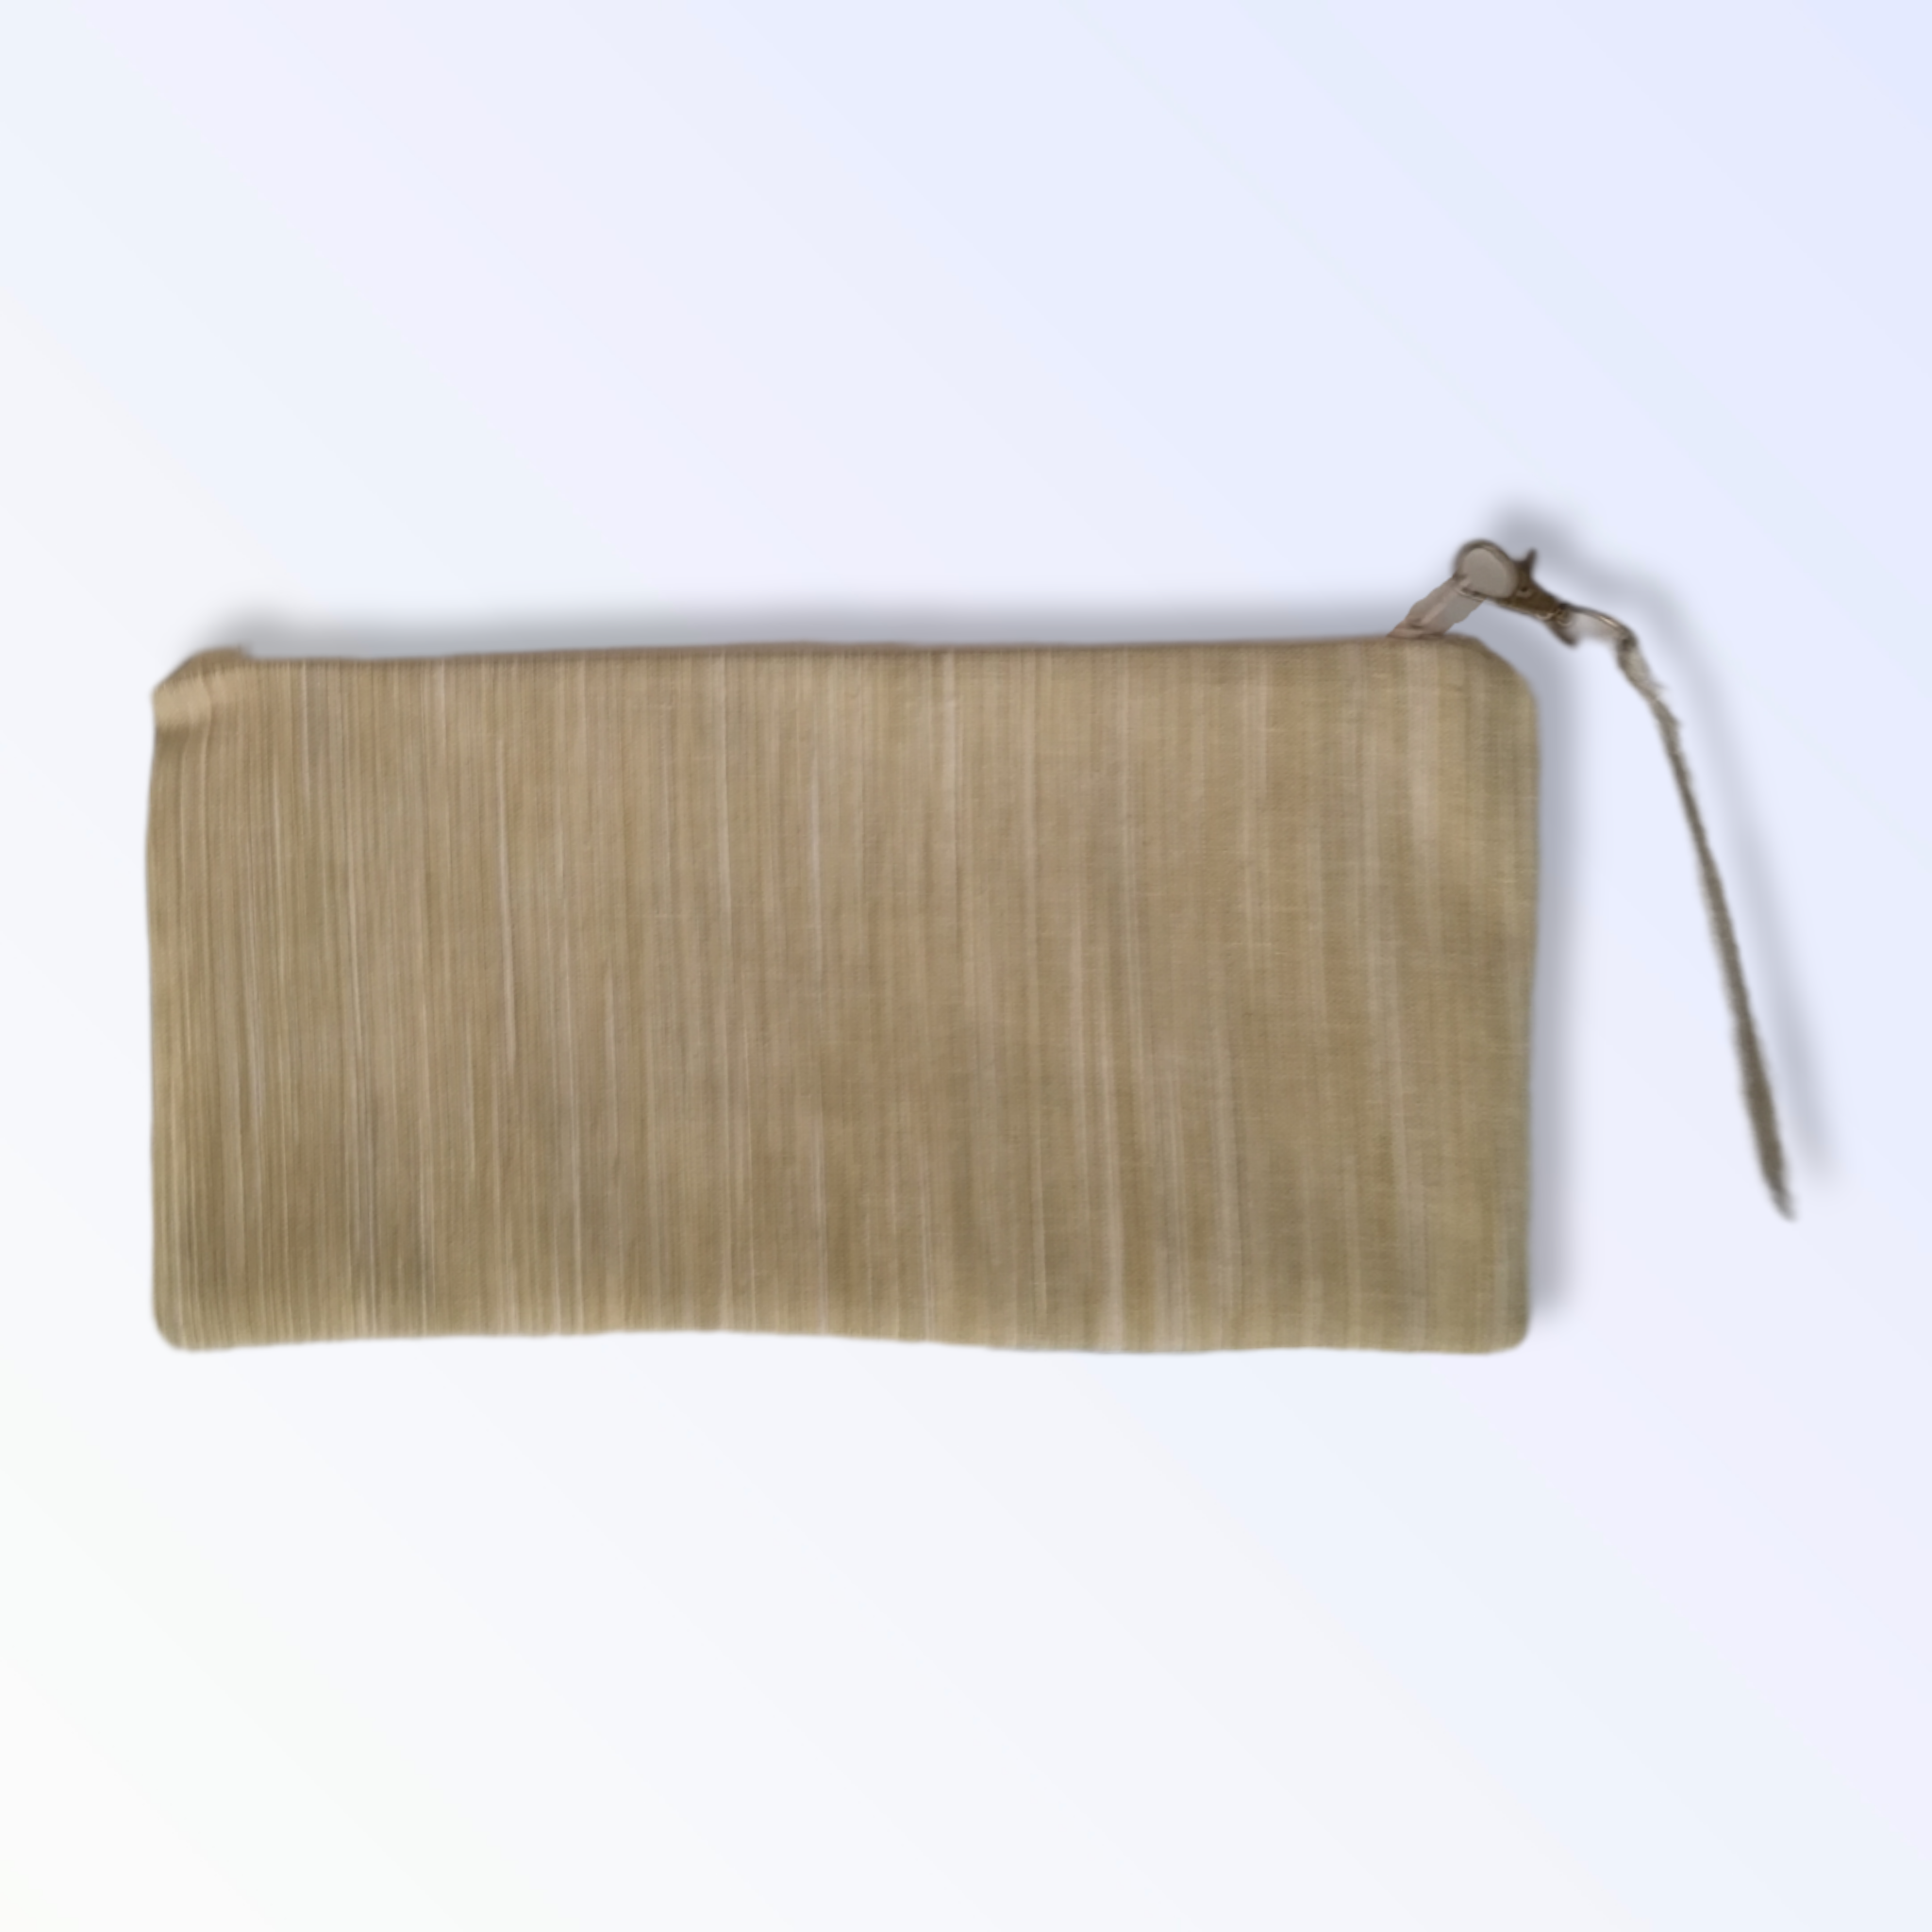 Woven Clutch Bag by Independent Reign